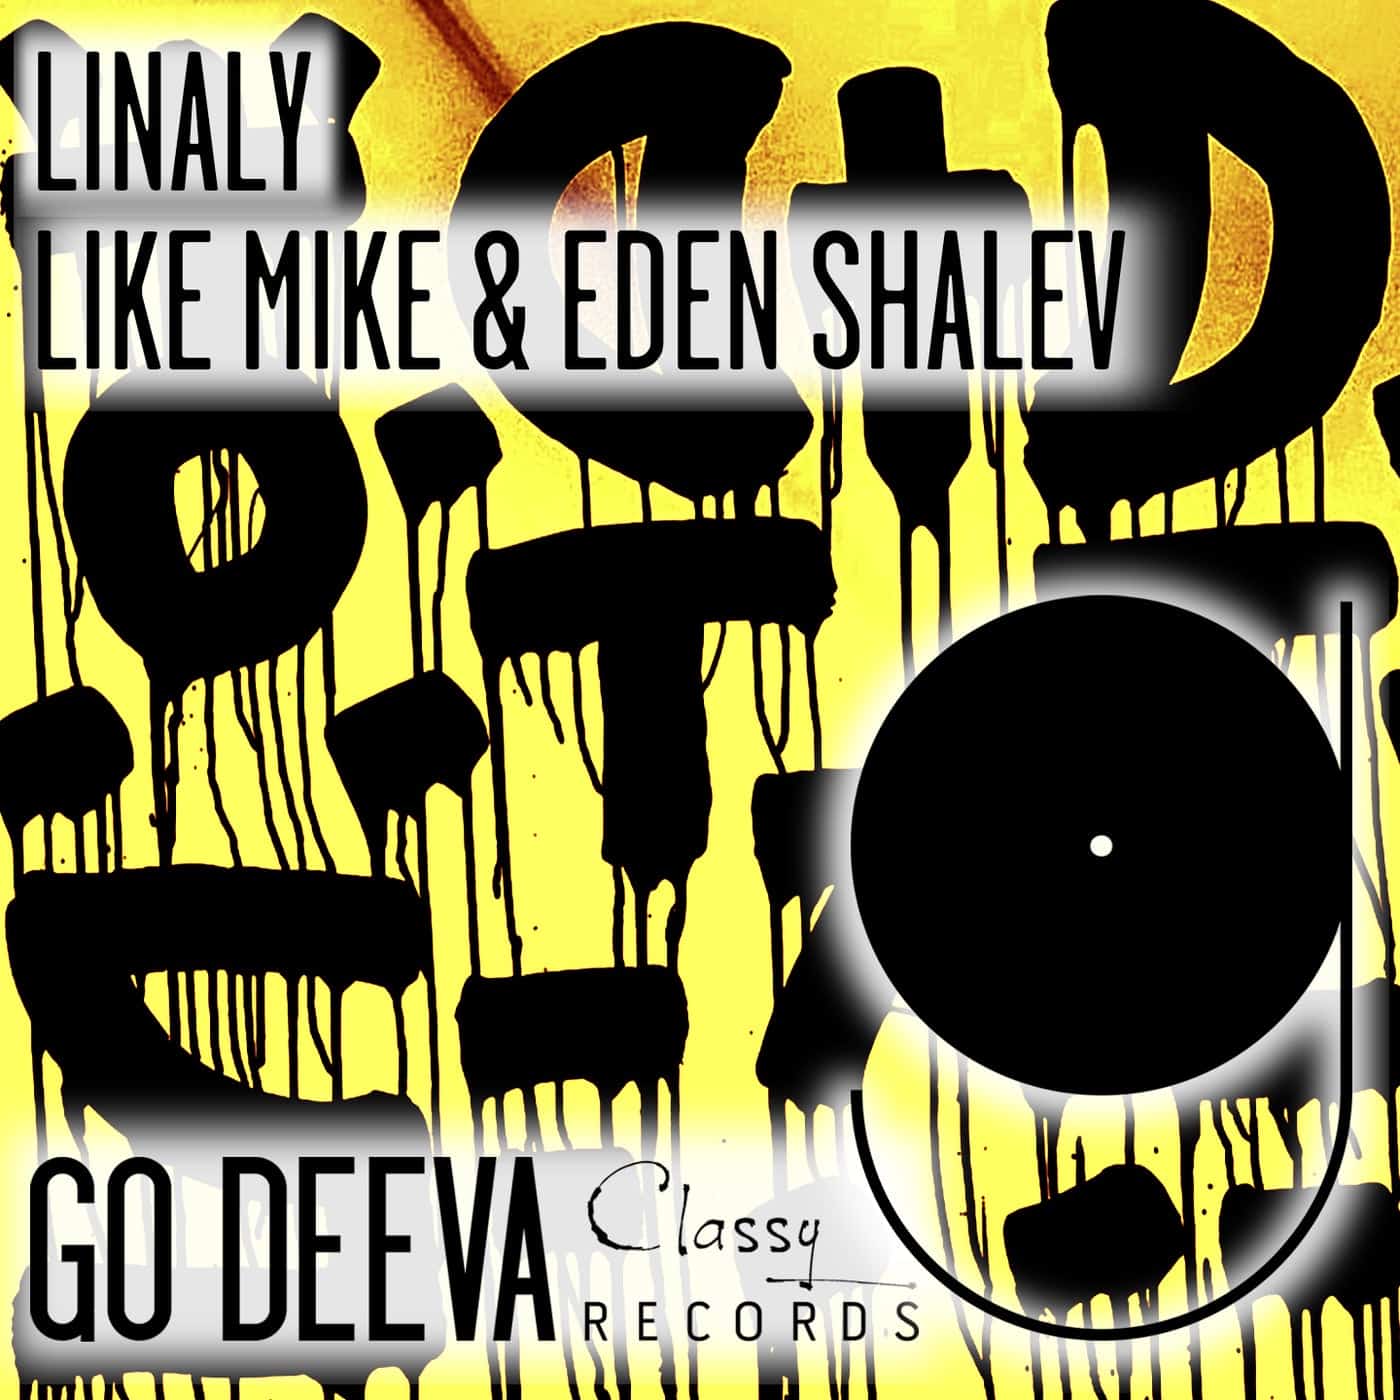 image cover: Linaly by Like Mike, Eden Shalev on Go Deeva Records